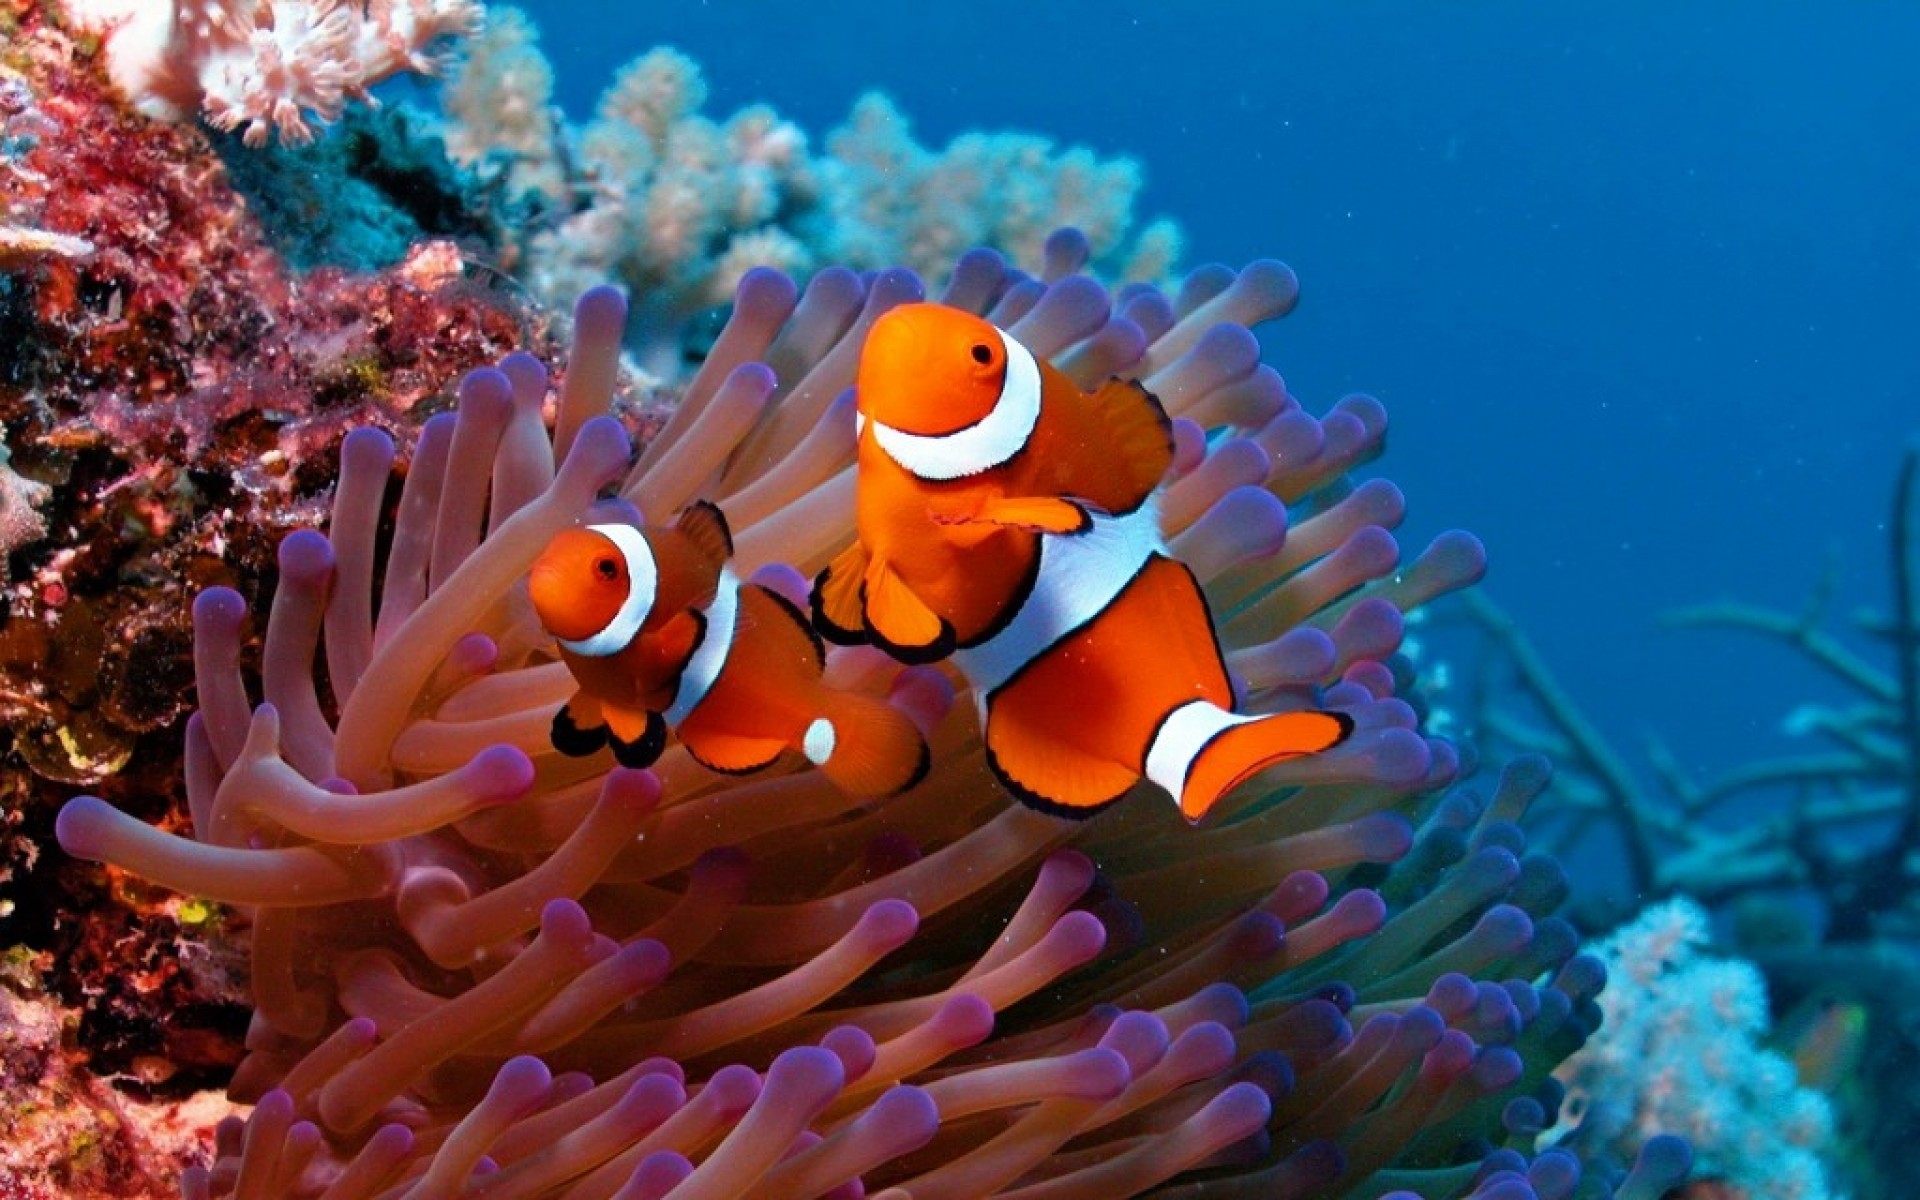 1920x1200 desktop clown fish wallpapers hd hd wallpapers background photos apple  samsung wallpapers wallpaper for iphone free download pictures 1920Ã1200  Wallpaper HD